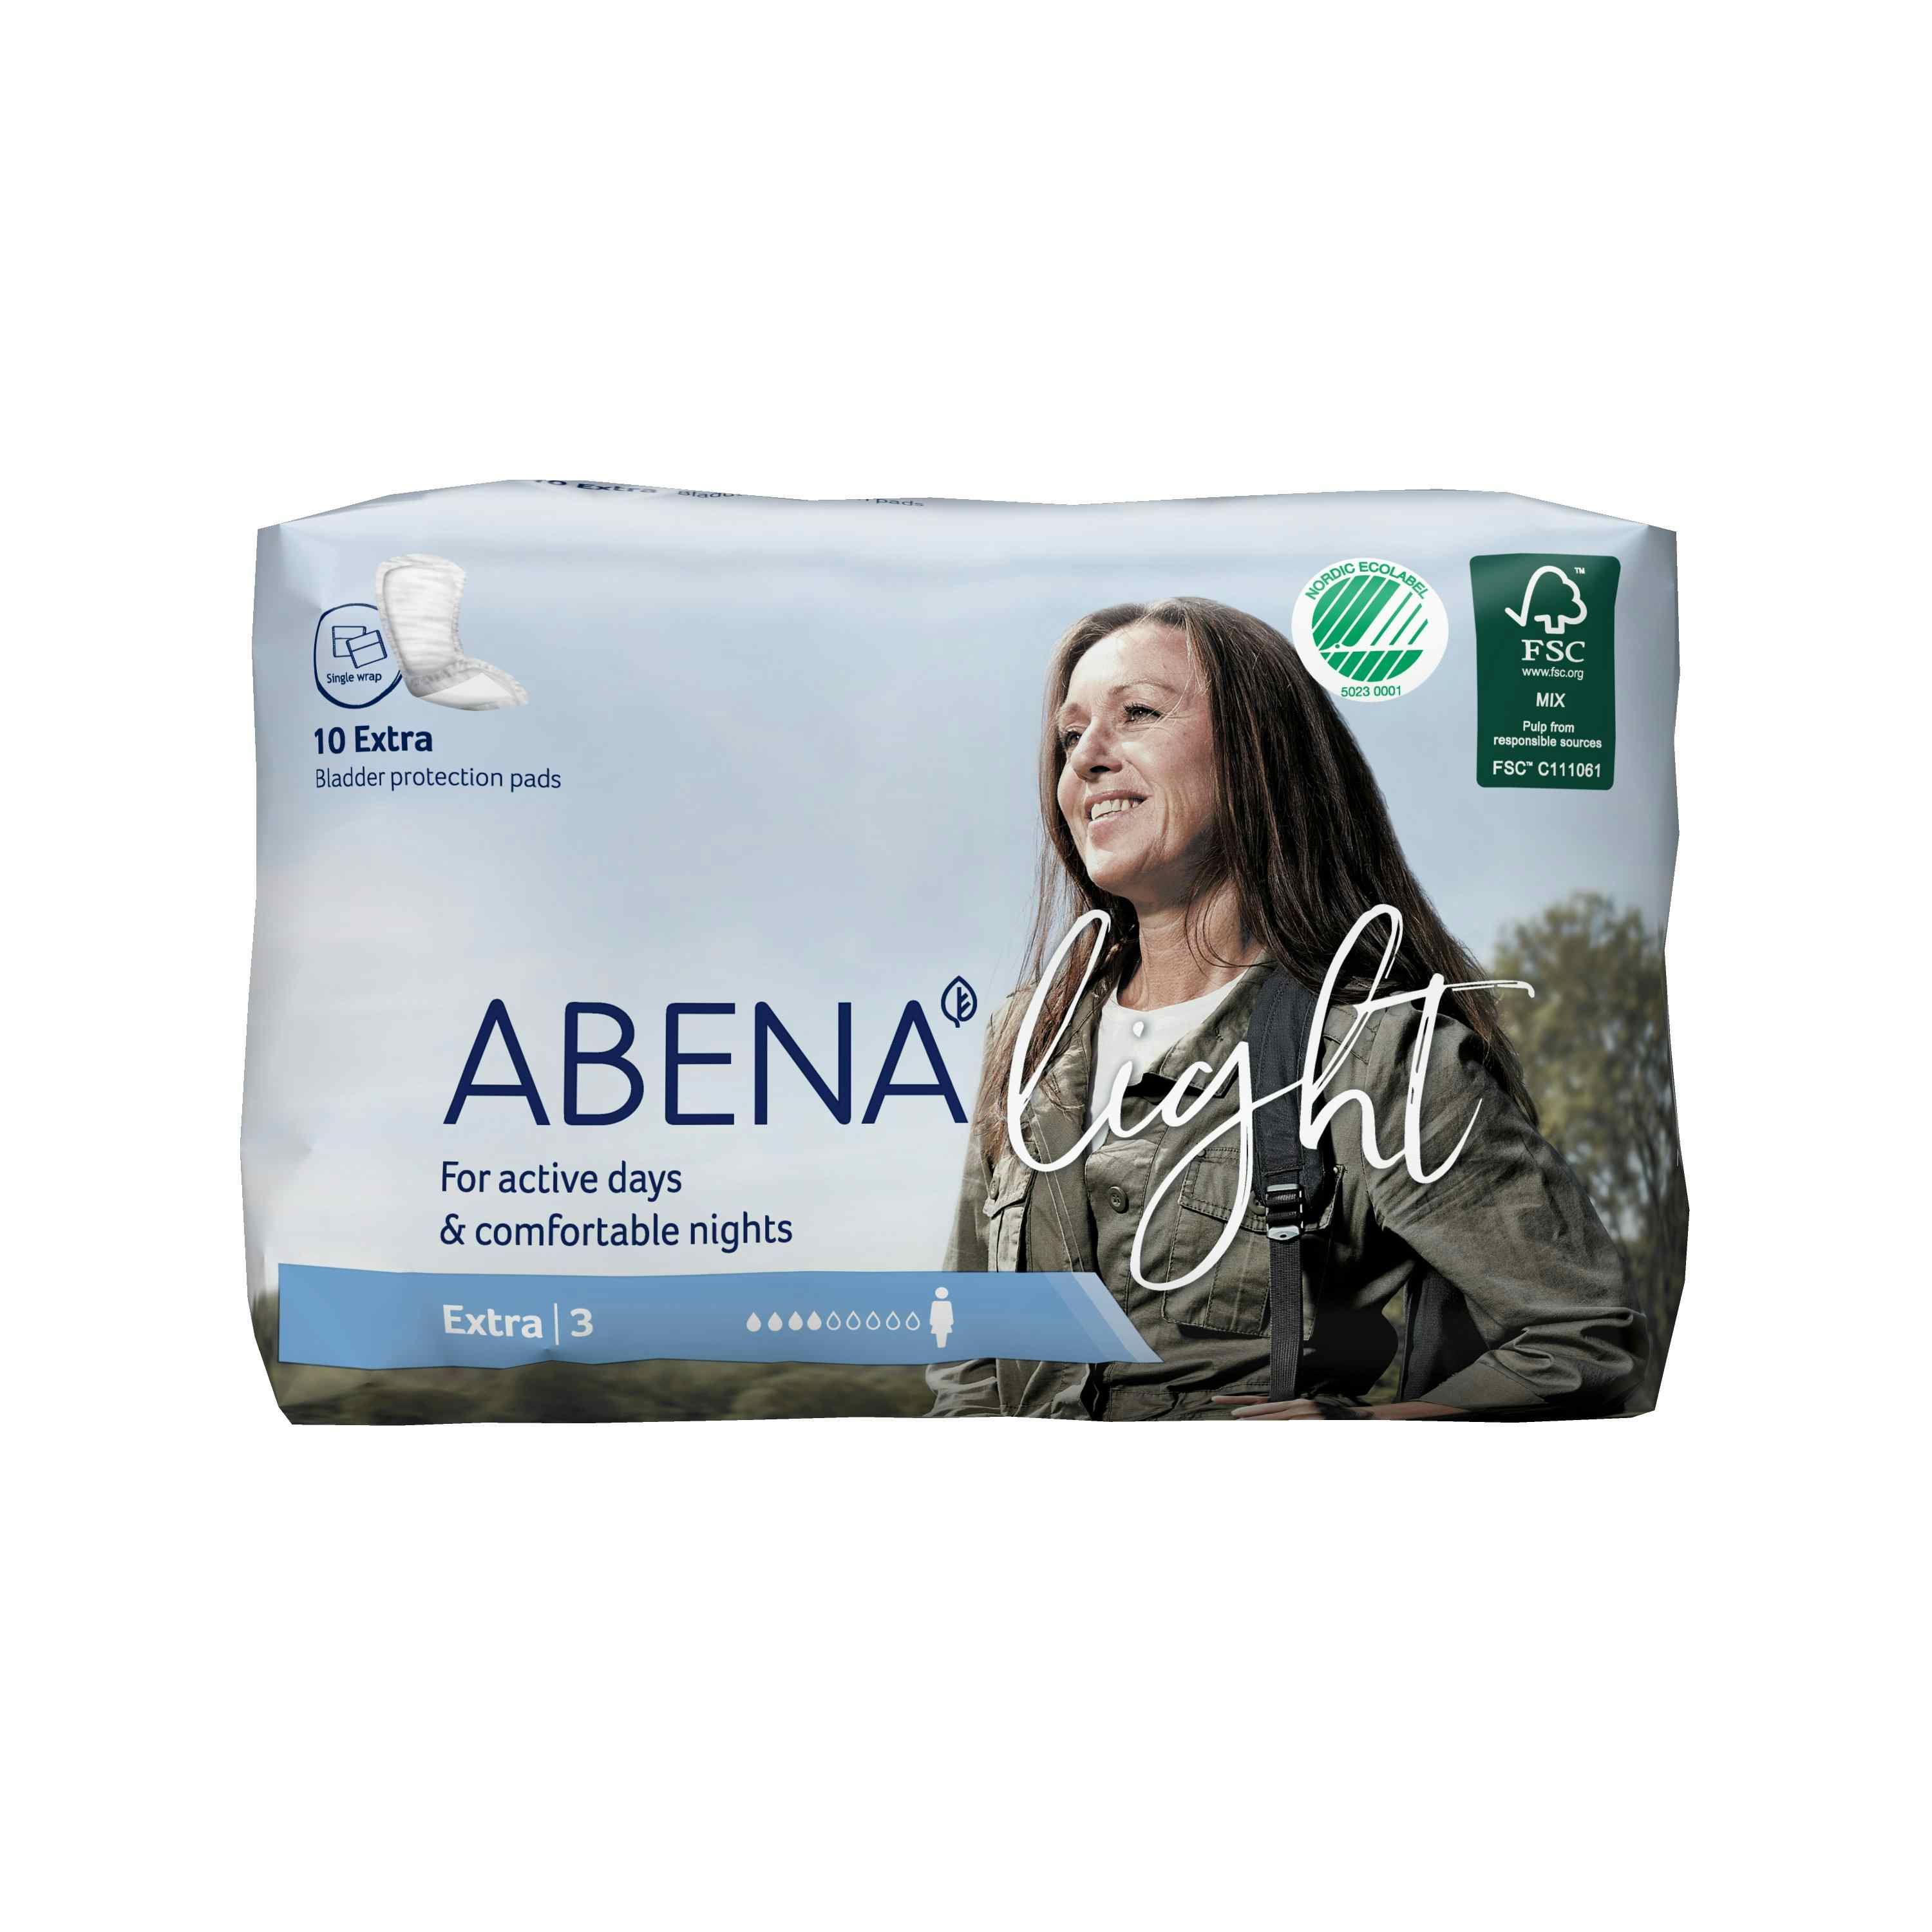 Abena Light Extra Disposable Unisex Adult Bladder Control Pad, Moderate Absorbency, 1000017158, One Size Fits Most - Bag of 10